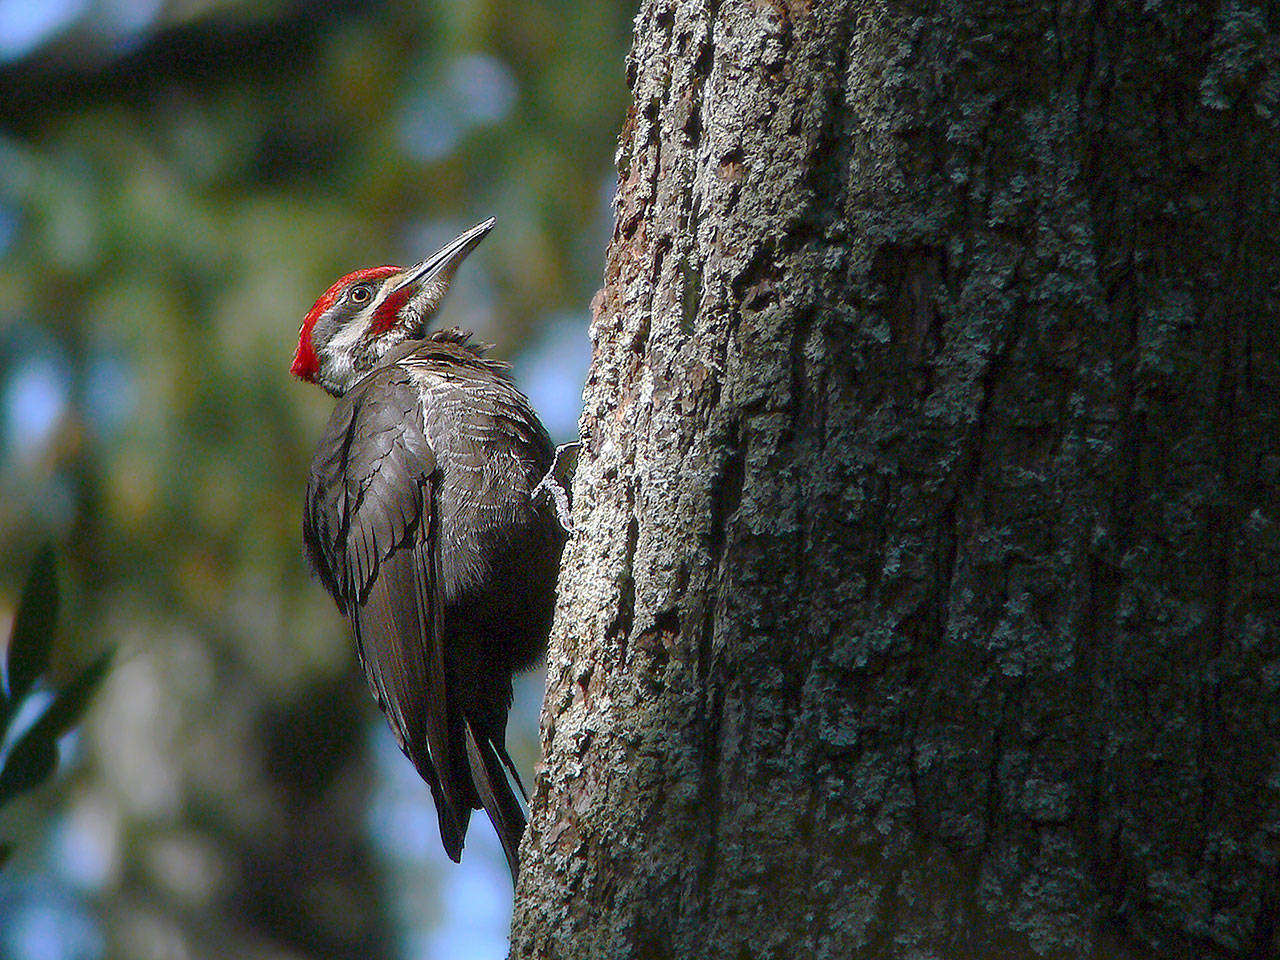 The pileated woodpecker is the largest of its family in North America and one of the top 10 largest woodpeckers in the world. (Photo courtesy of www.paradisebirding.com)